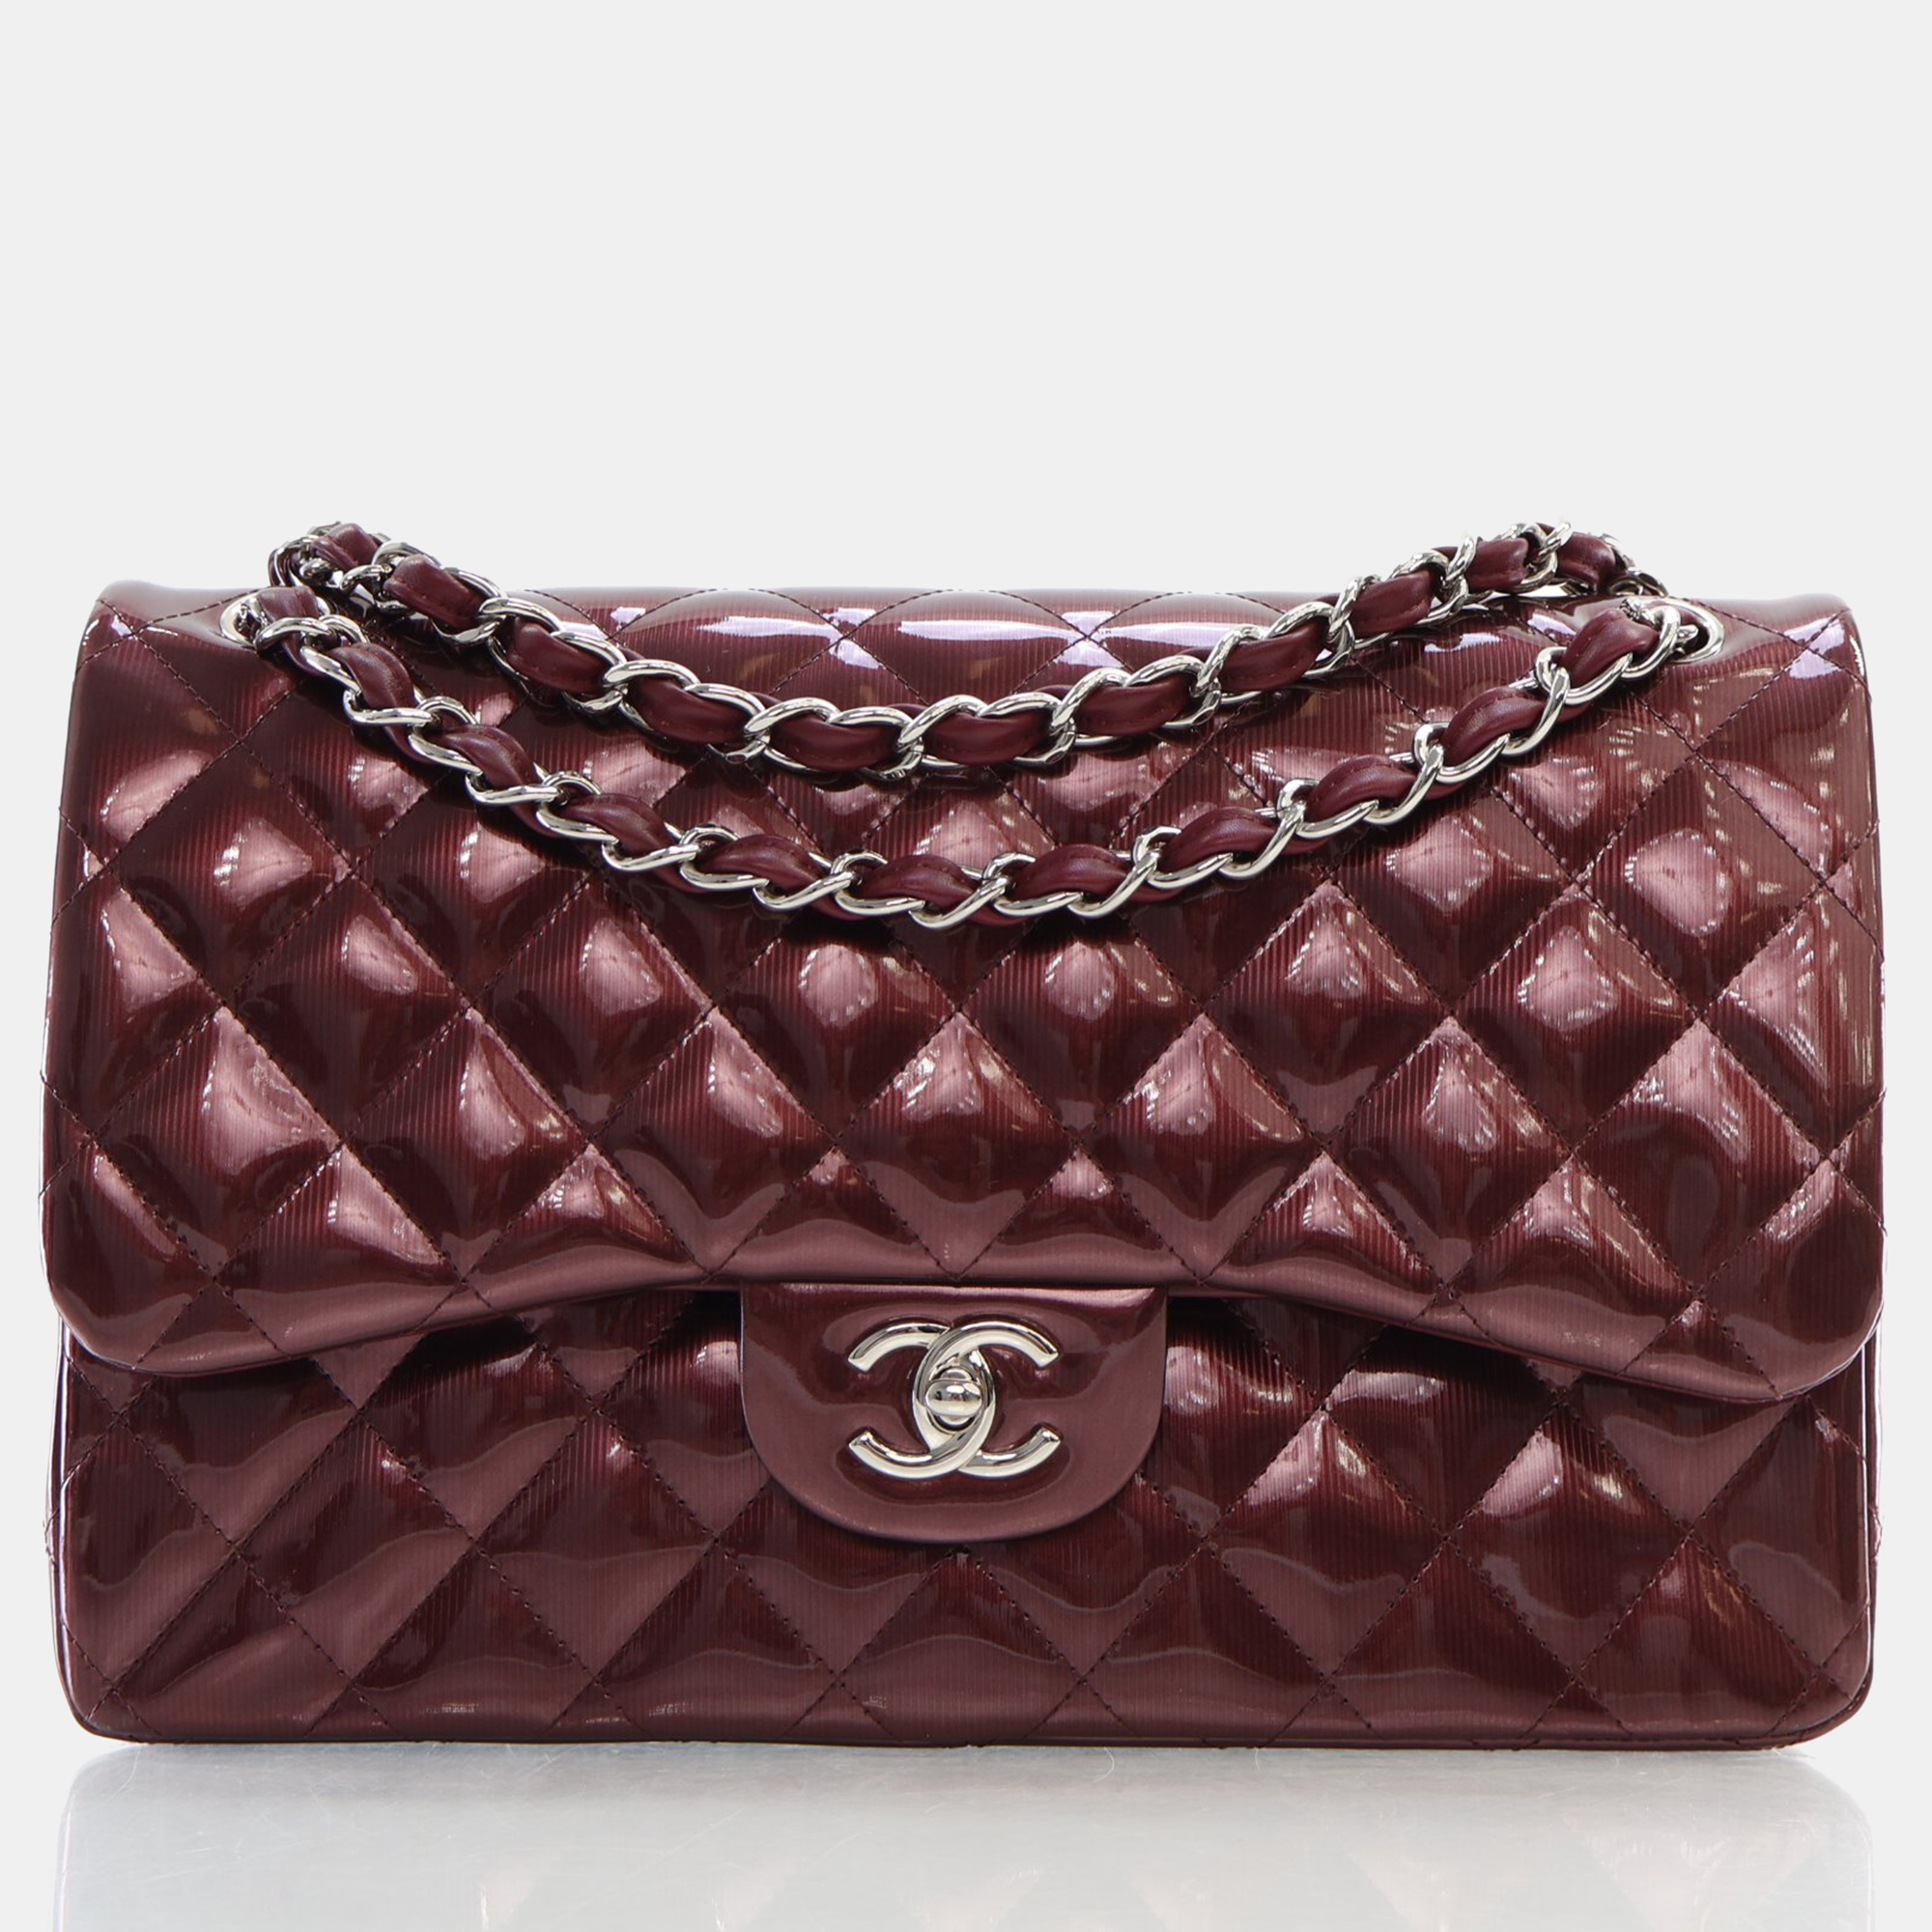 Chanel burgundy patent leather large classic double flap shoulder bags